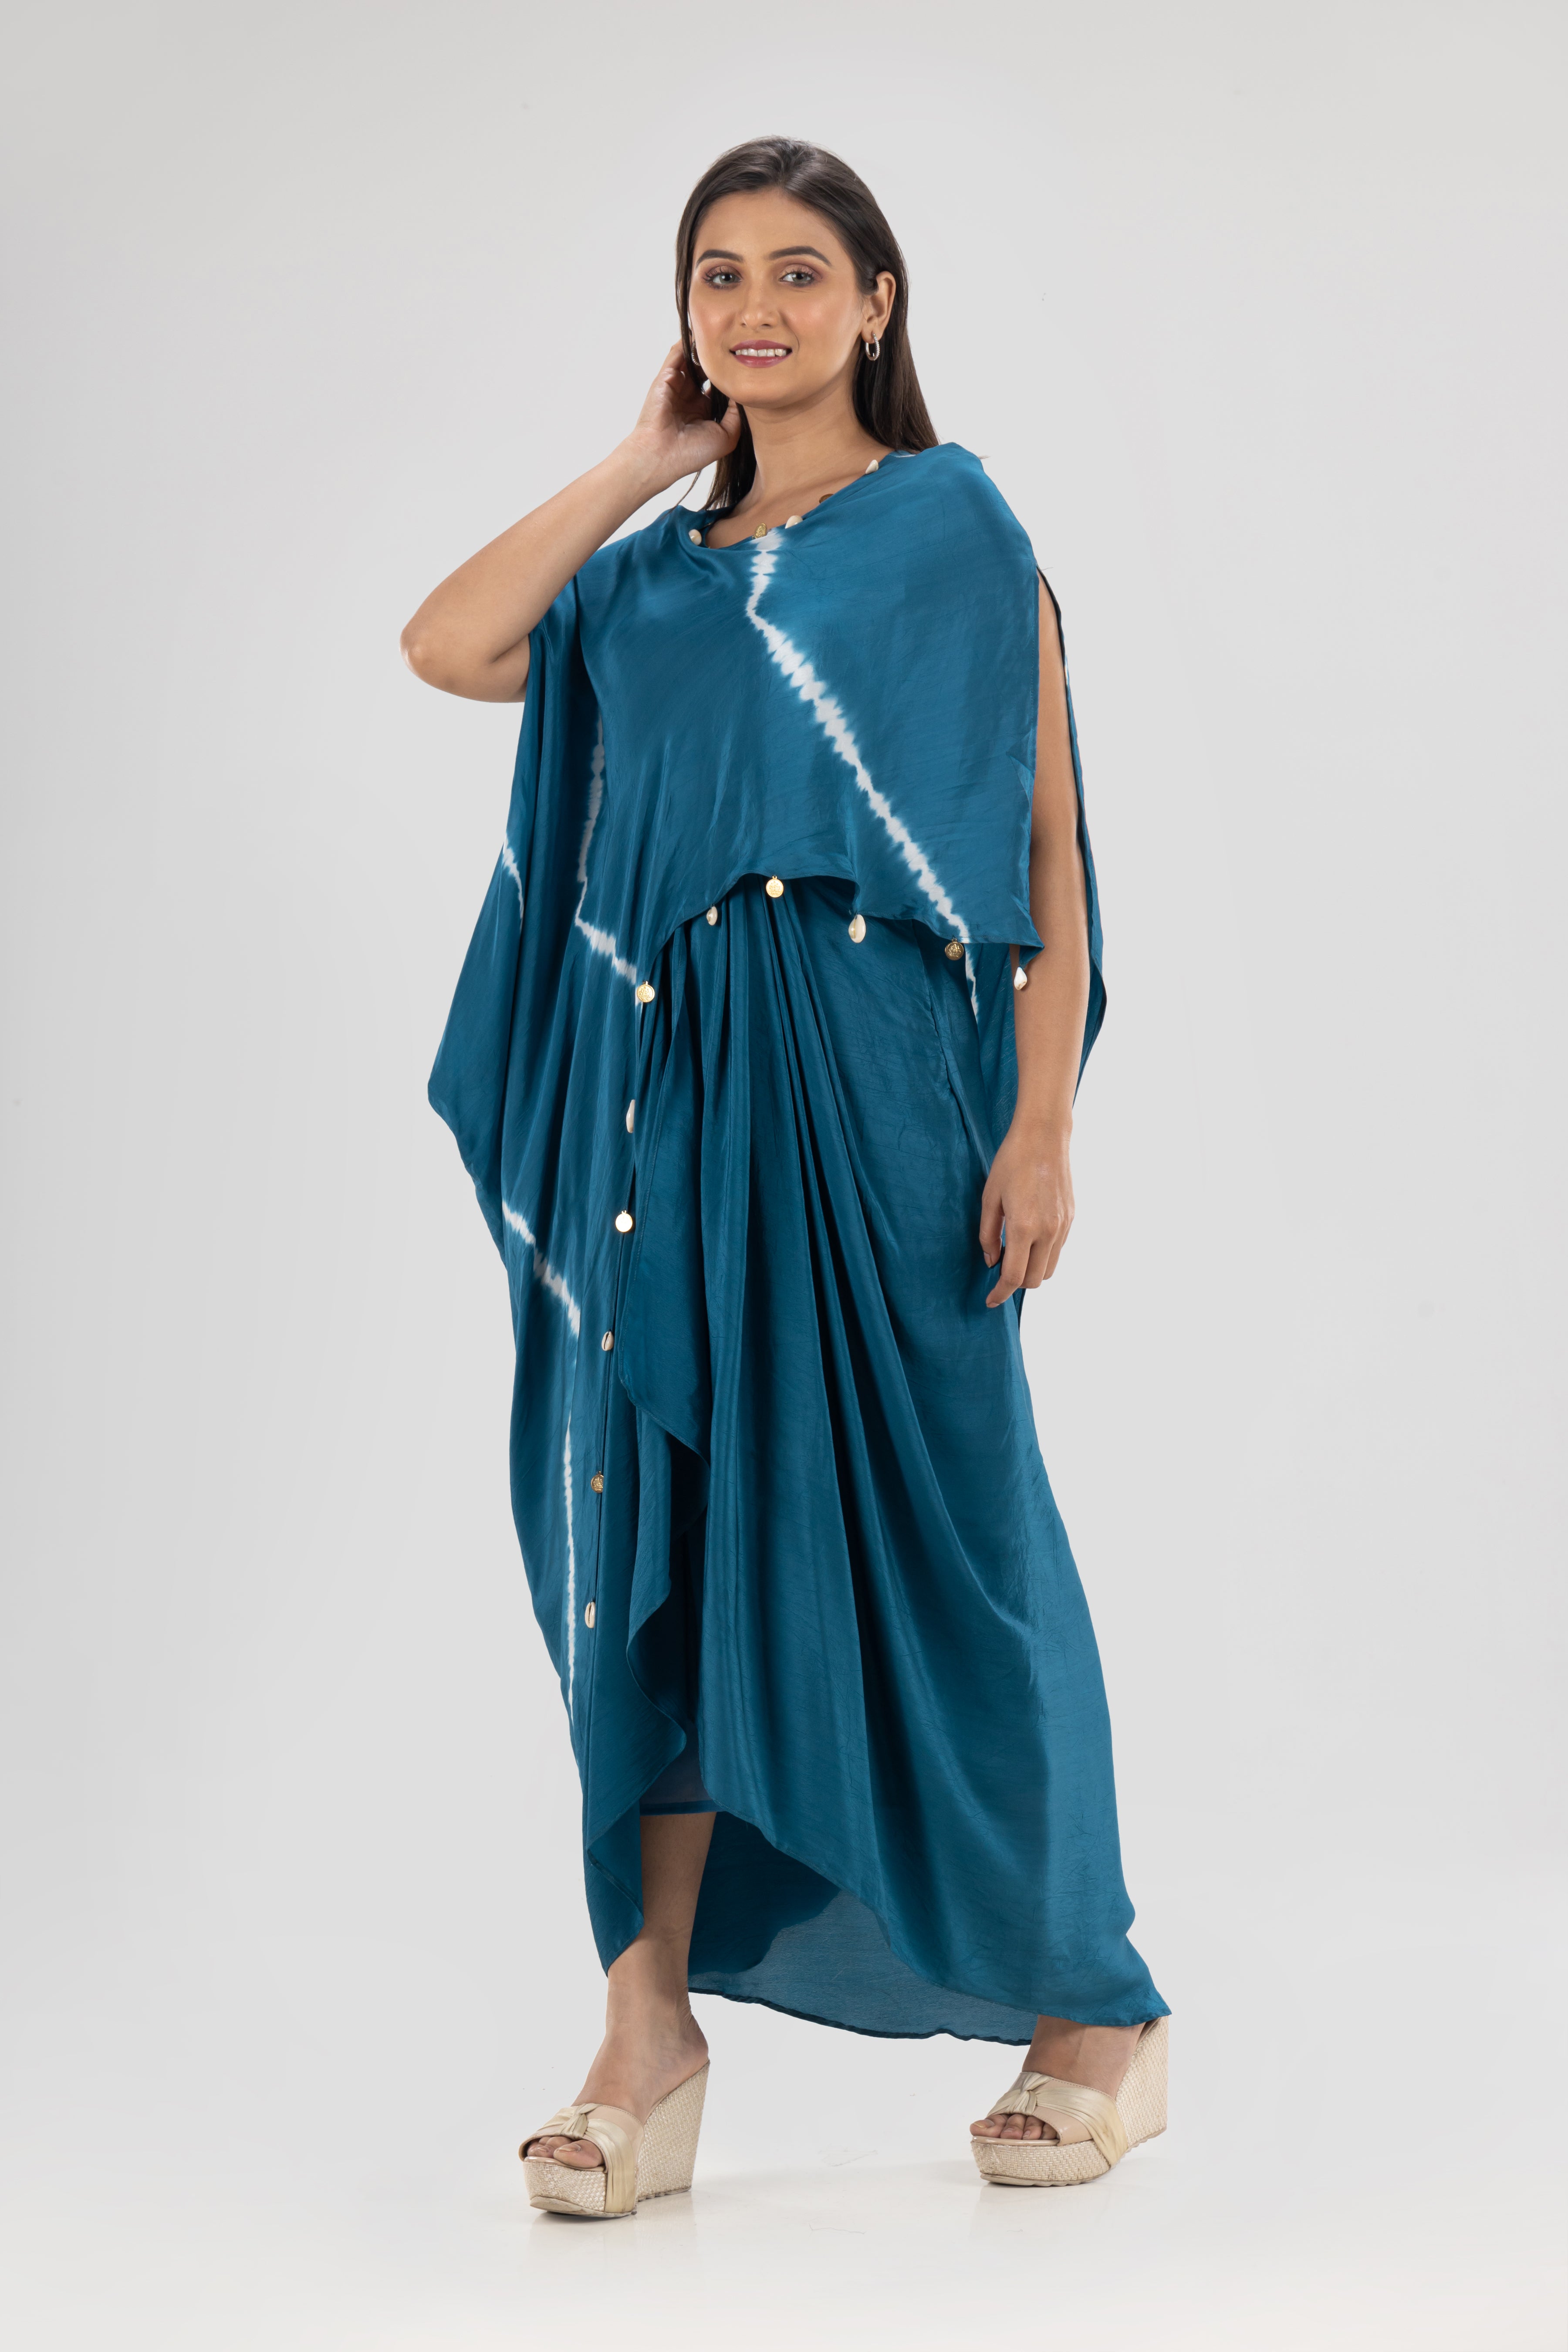 Blue Tie-dyed Tunic with Draped Skirt